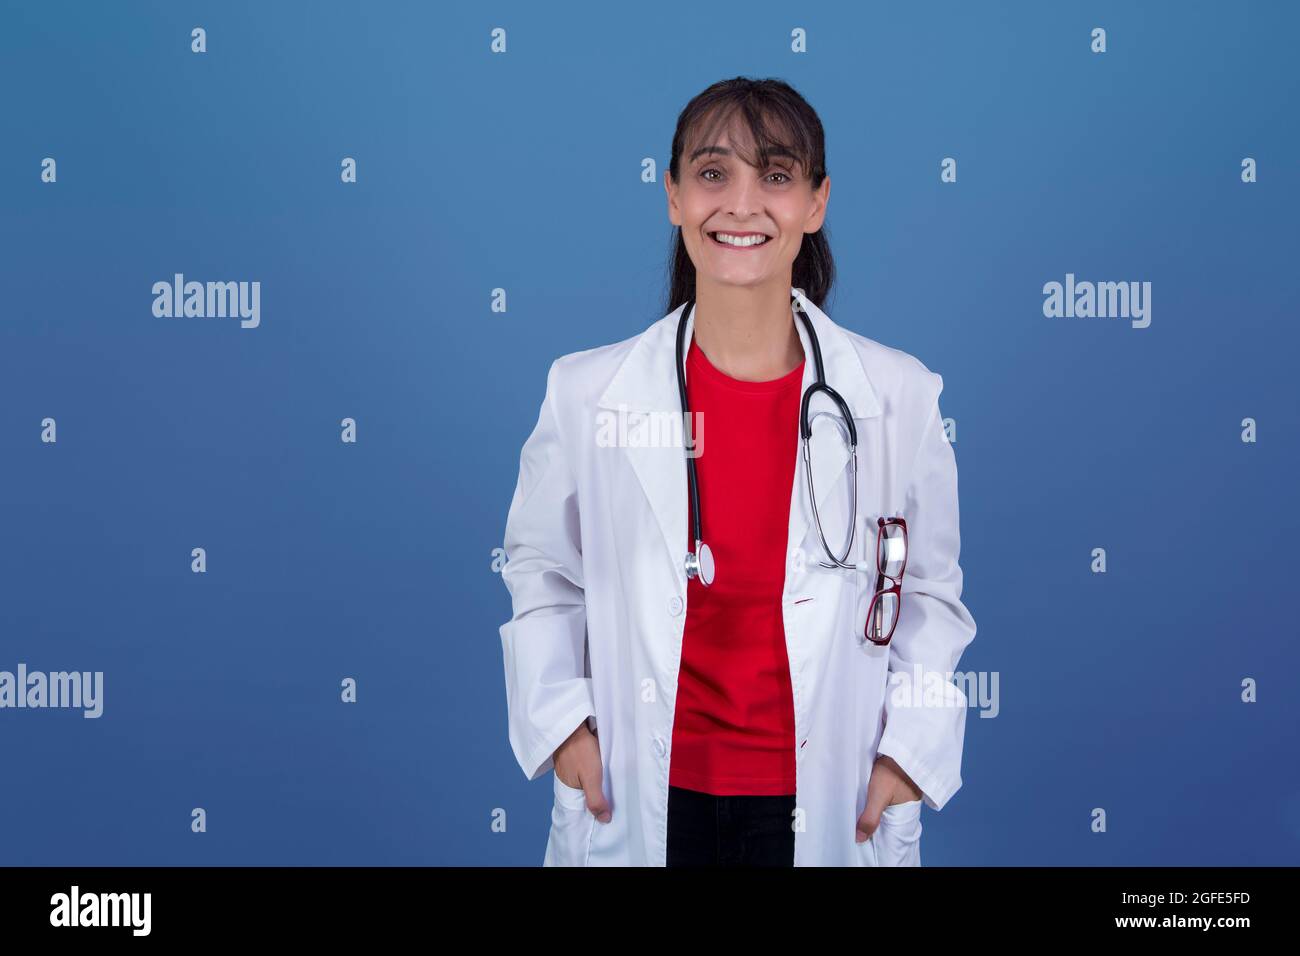 attractive 40-45 year old female doctor looking straight ahead and smiling Stock Photo